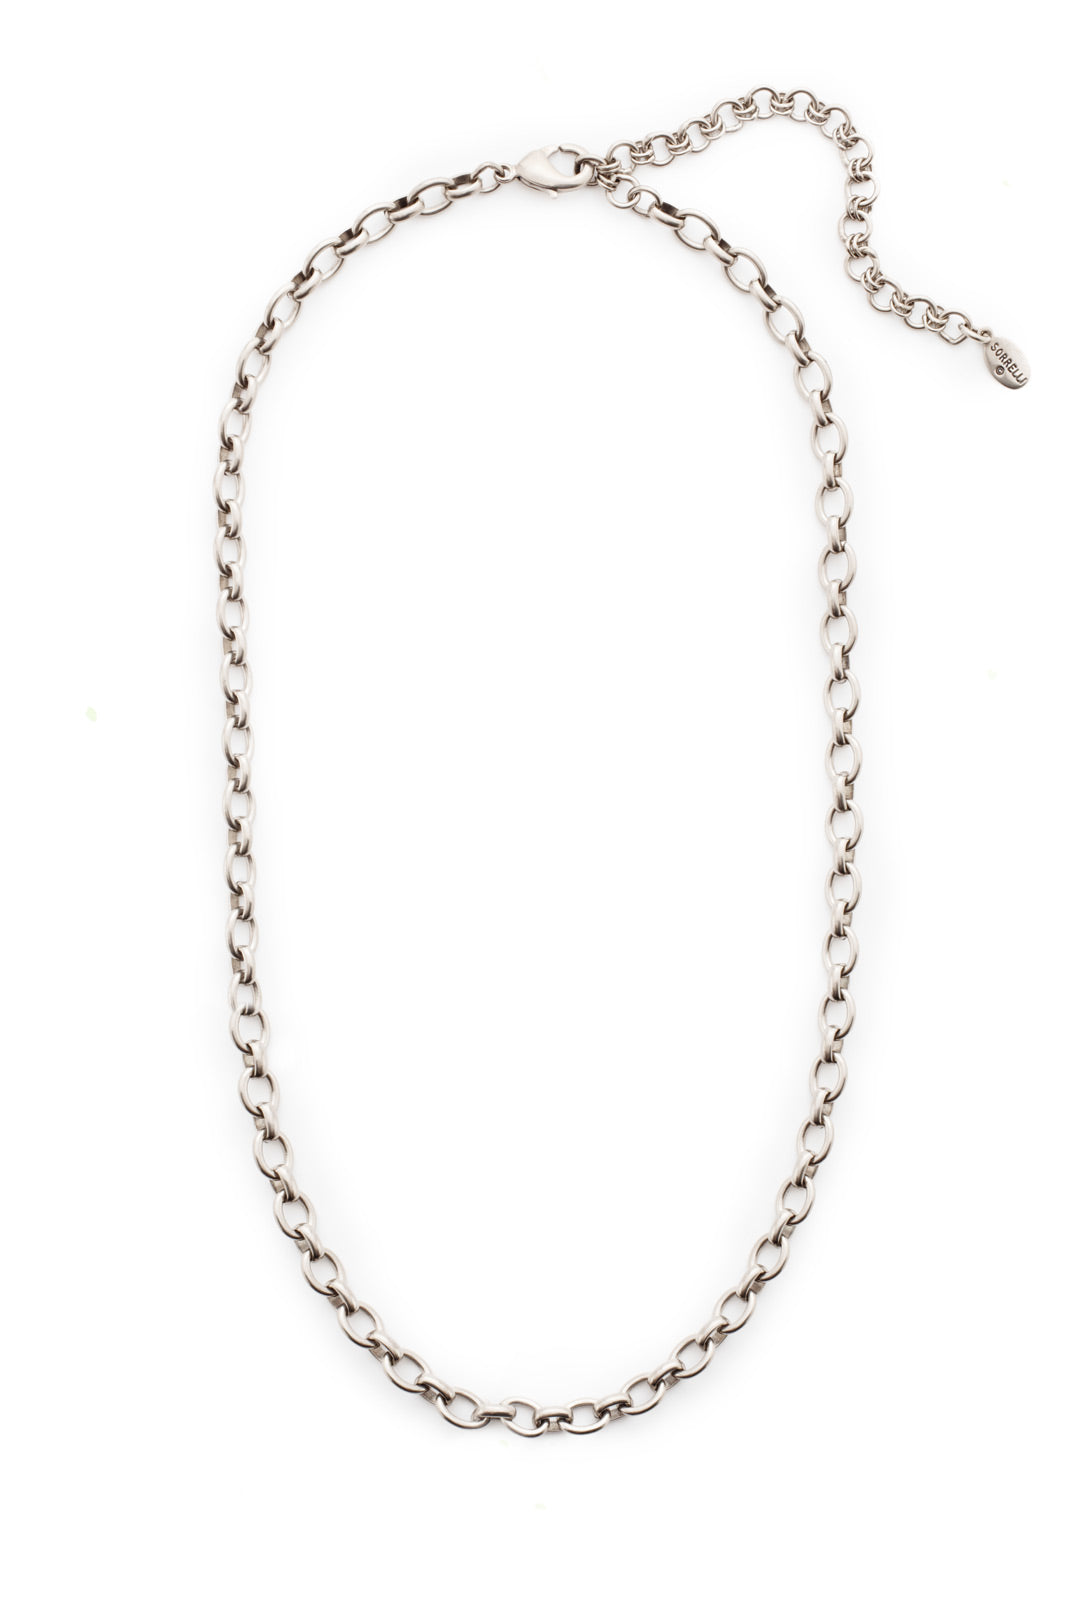 Maci Tennis Necklace - 4NEU94ASCRY - <p>The Maci Tennis Necklace is a little chunky but a simple stunner you can wear for years and years to come. From Sorrelli's Crystal collection in our Antique Silver-tone finish.</p>